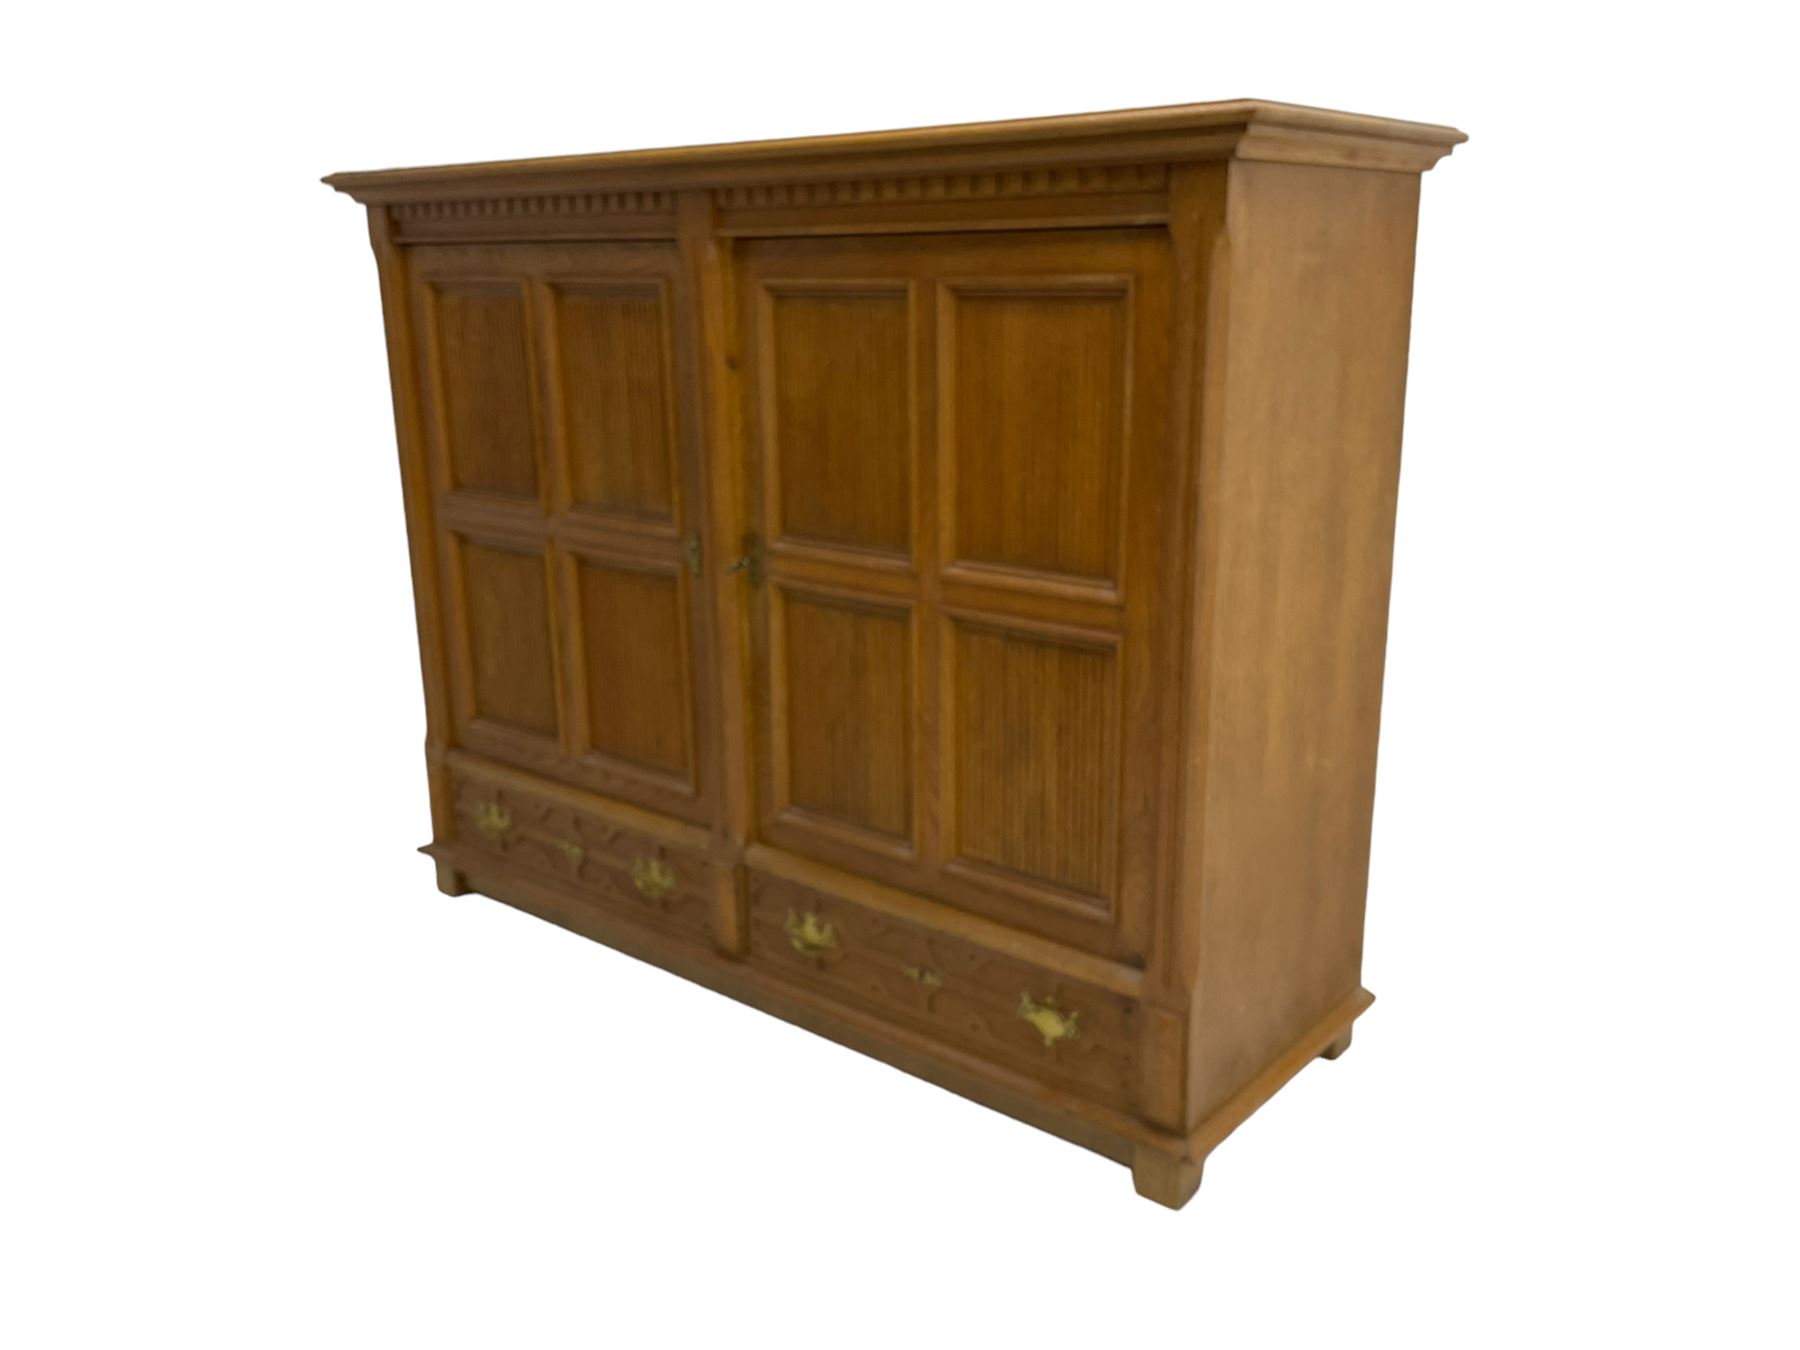 Continental 20th century carved oak cabinet - Image 5 of 6